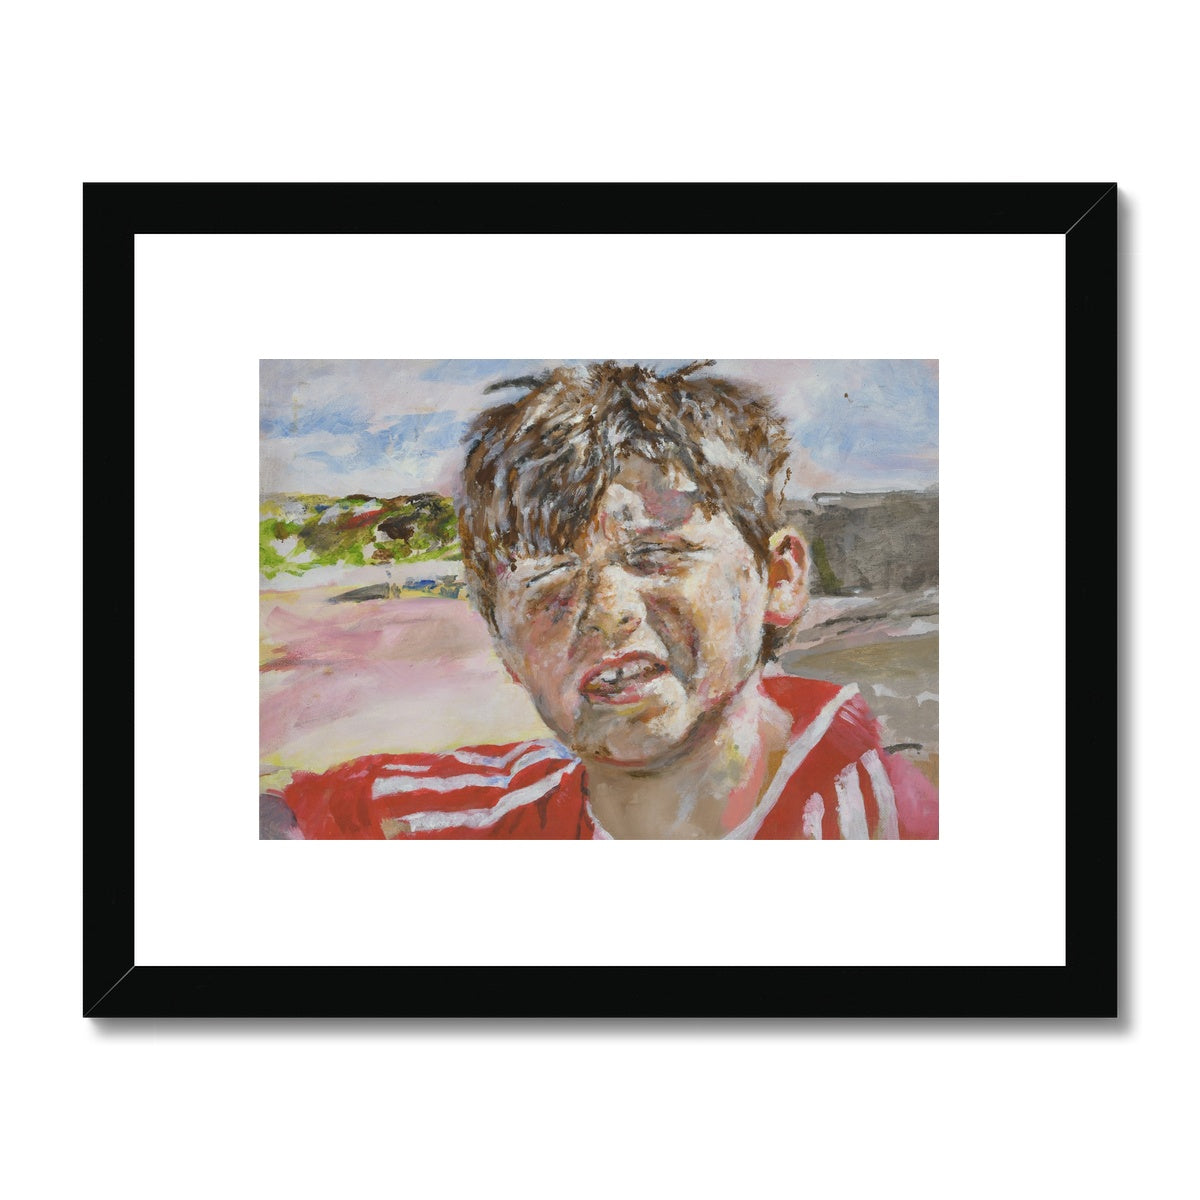 Eating at the Beach, Framed & Mounted Print